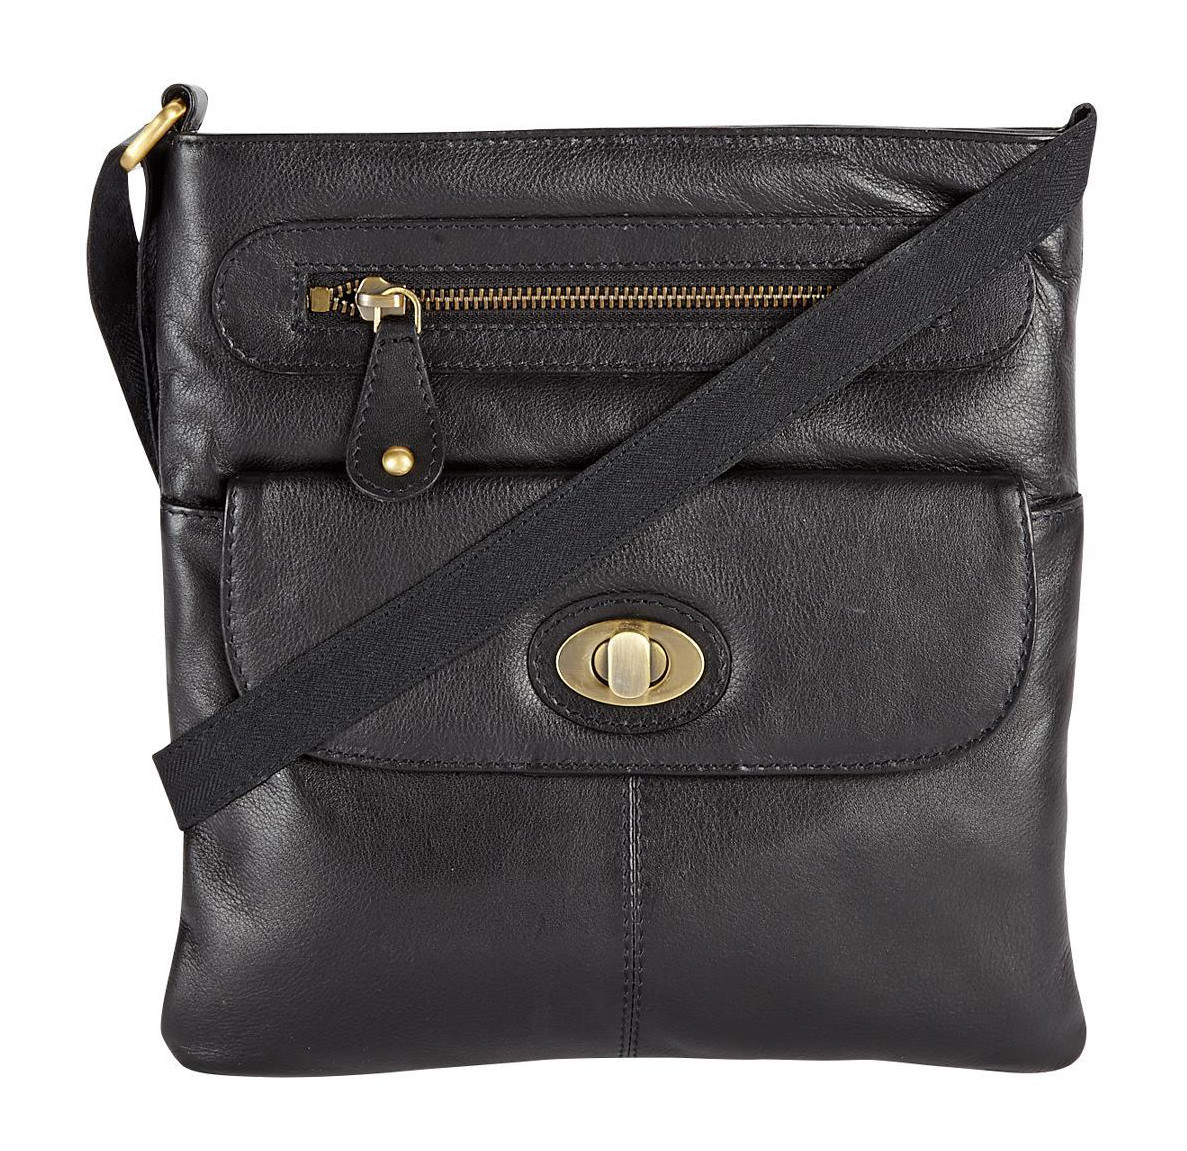 Suzanne Leather Pocket Front Crossbody Bag £26.00 - Very - Image: Very